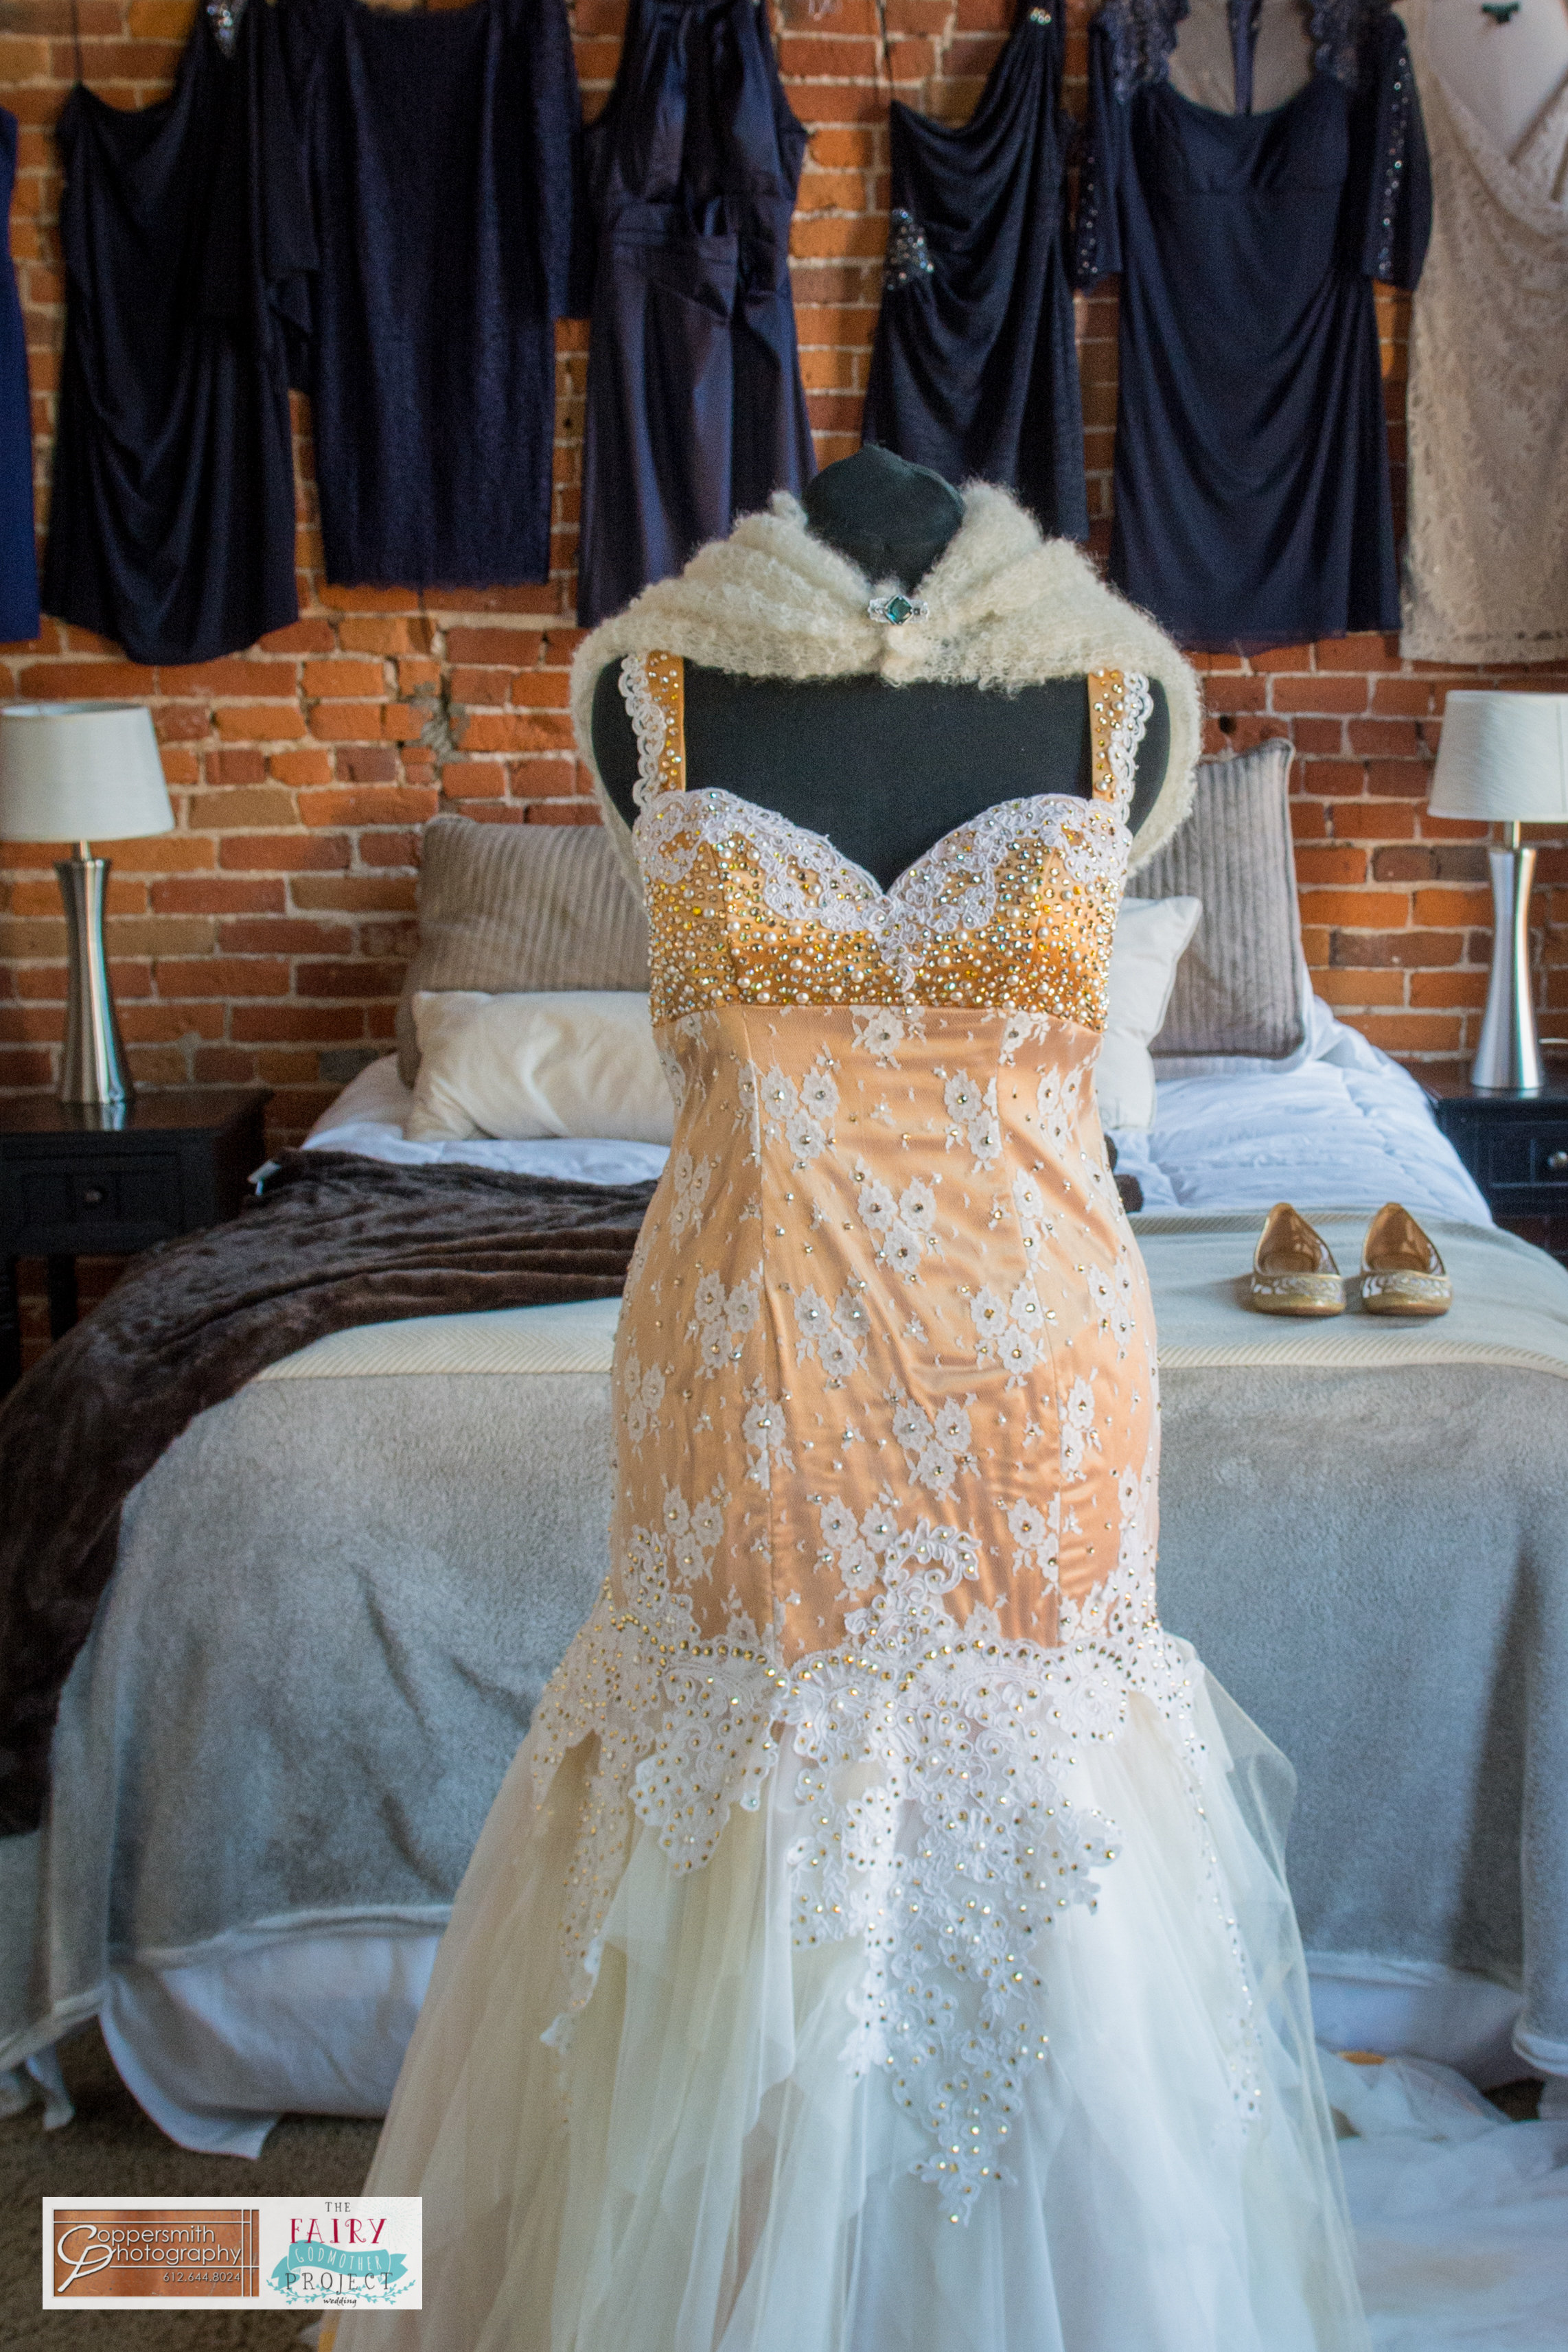 View More: http://coppersmithphotography.pass.us/fairygodmotherprojectwedding2015